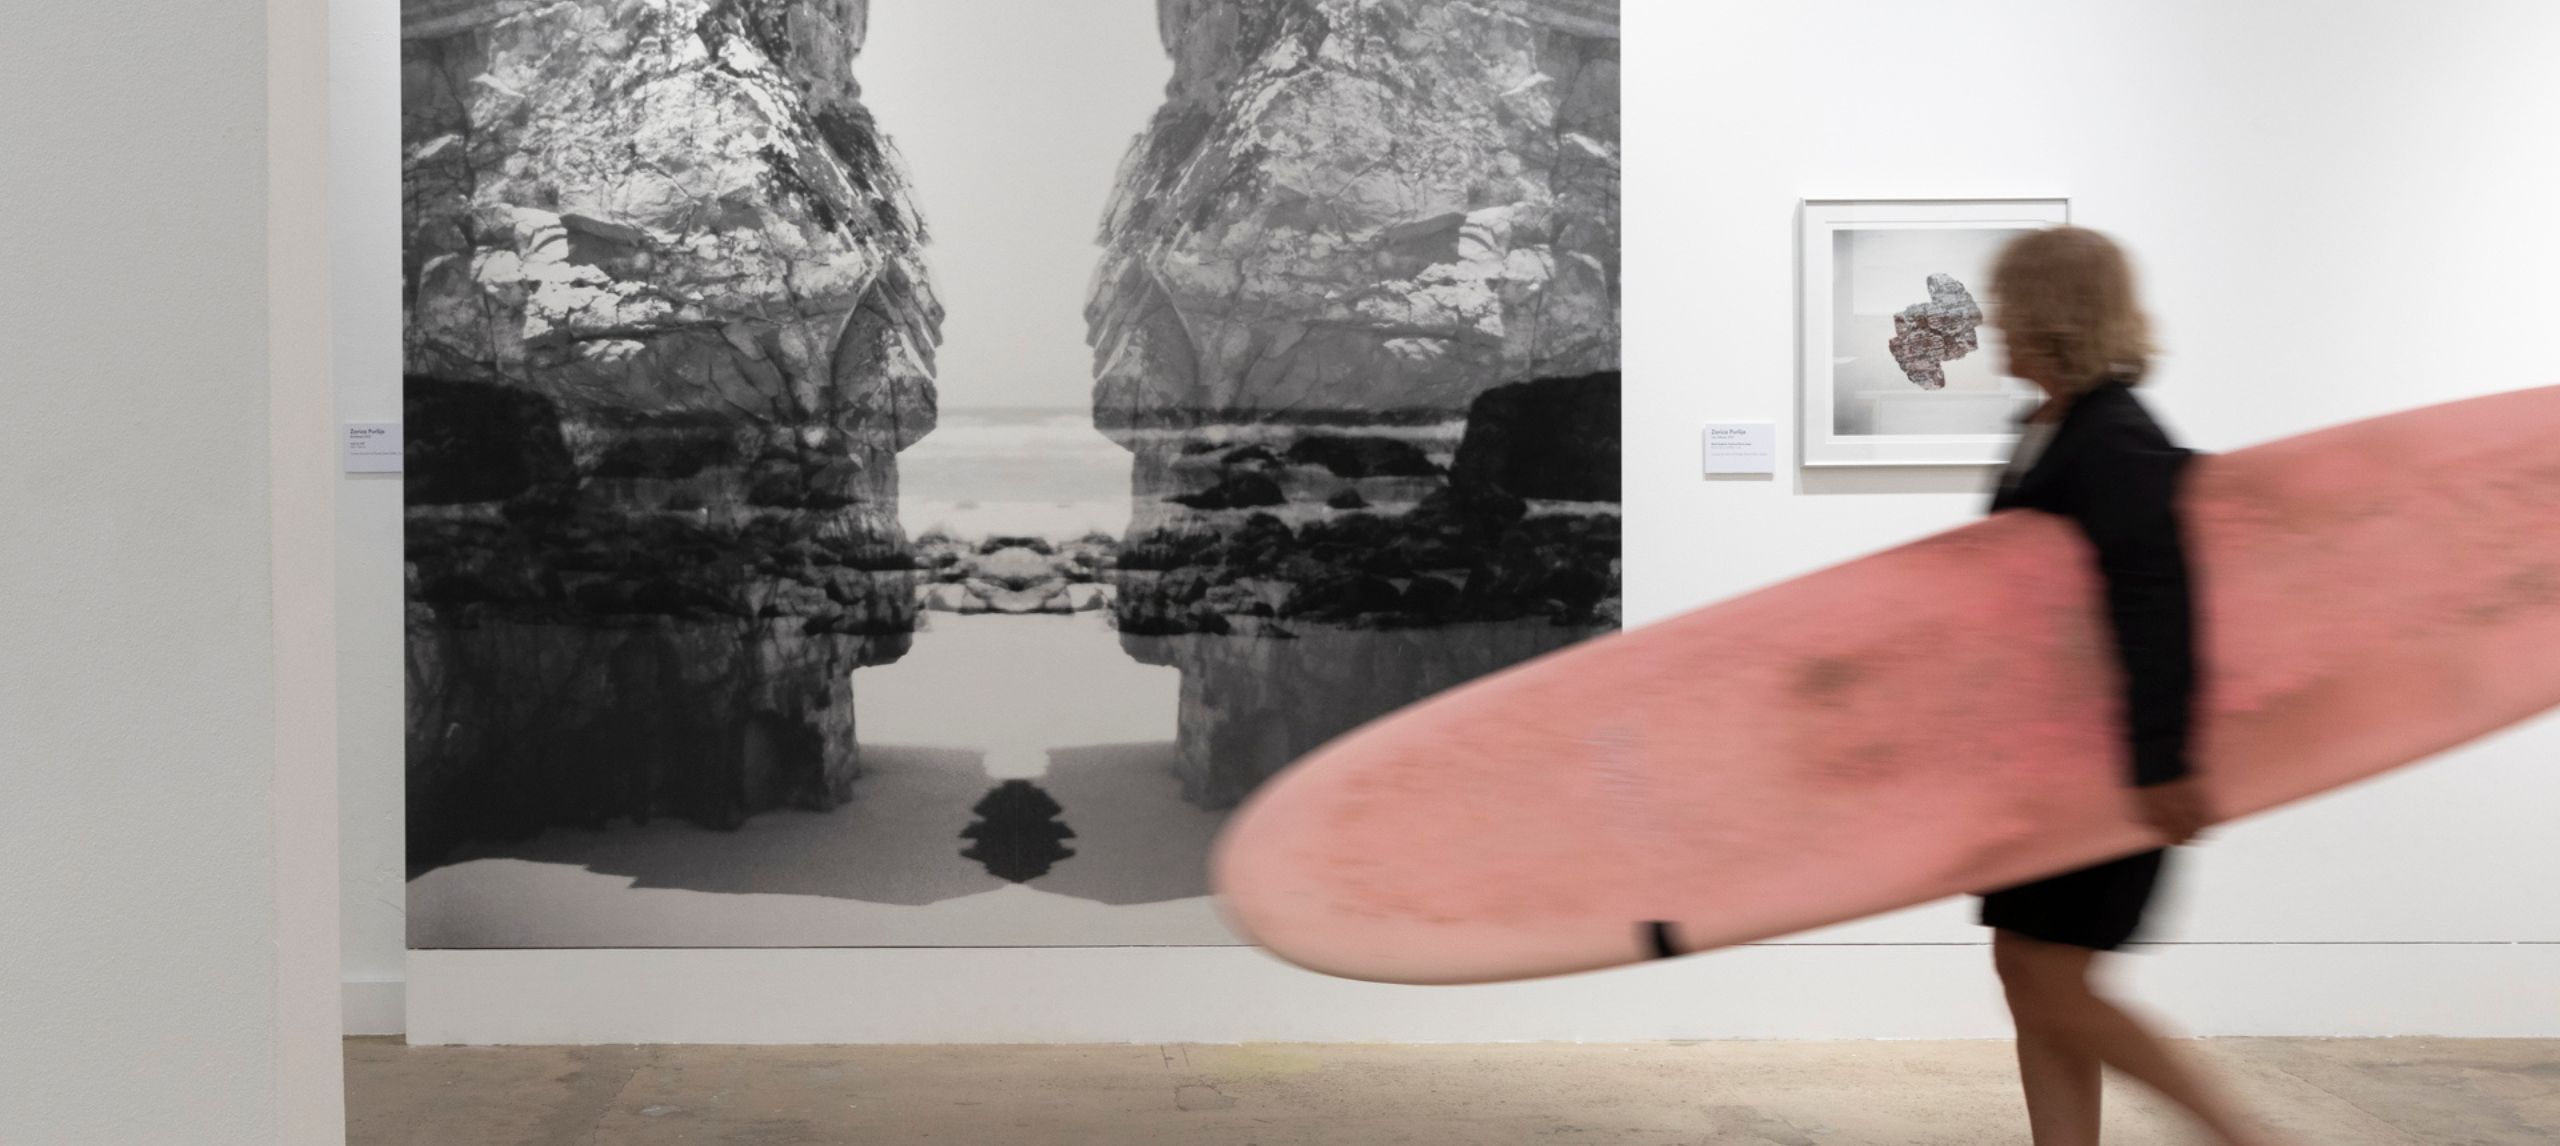 Man with pink surfboard walking through gallery looking at large black and white rock photography artwork